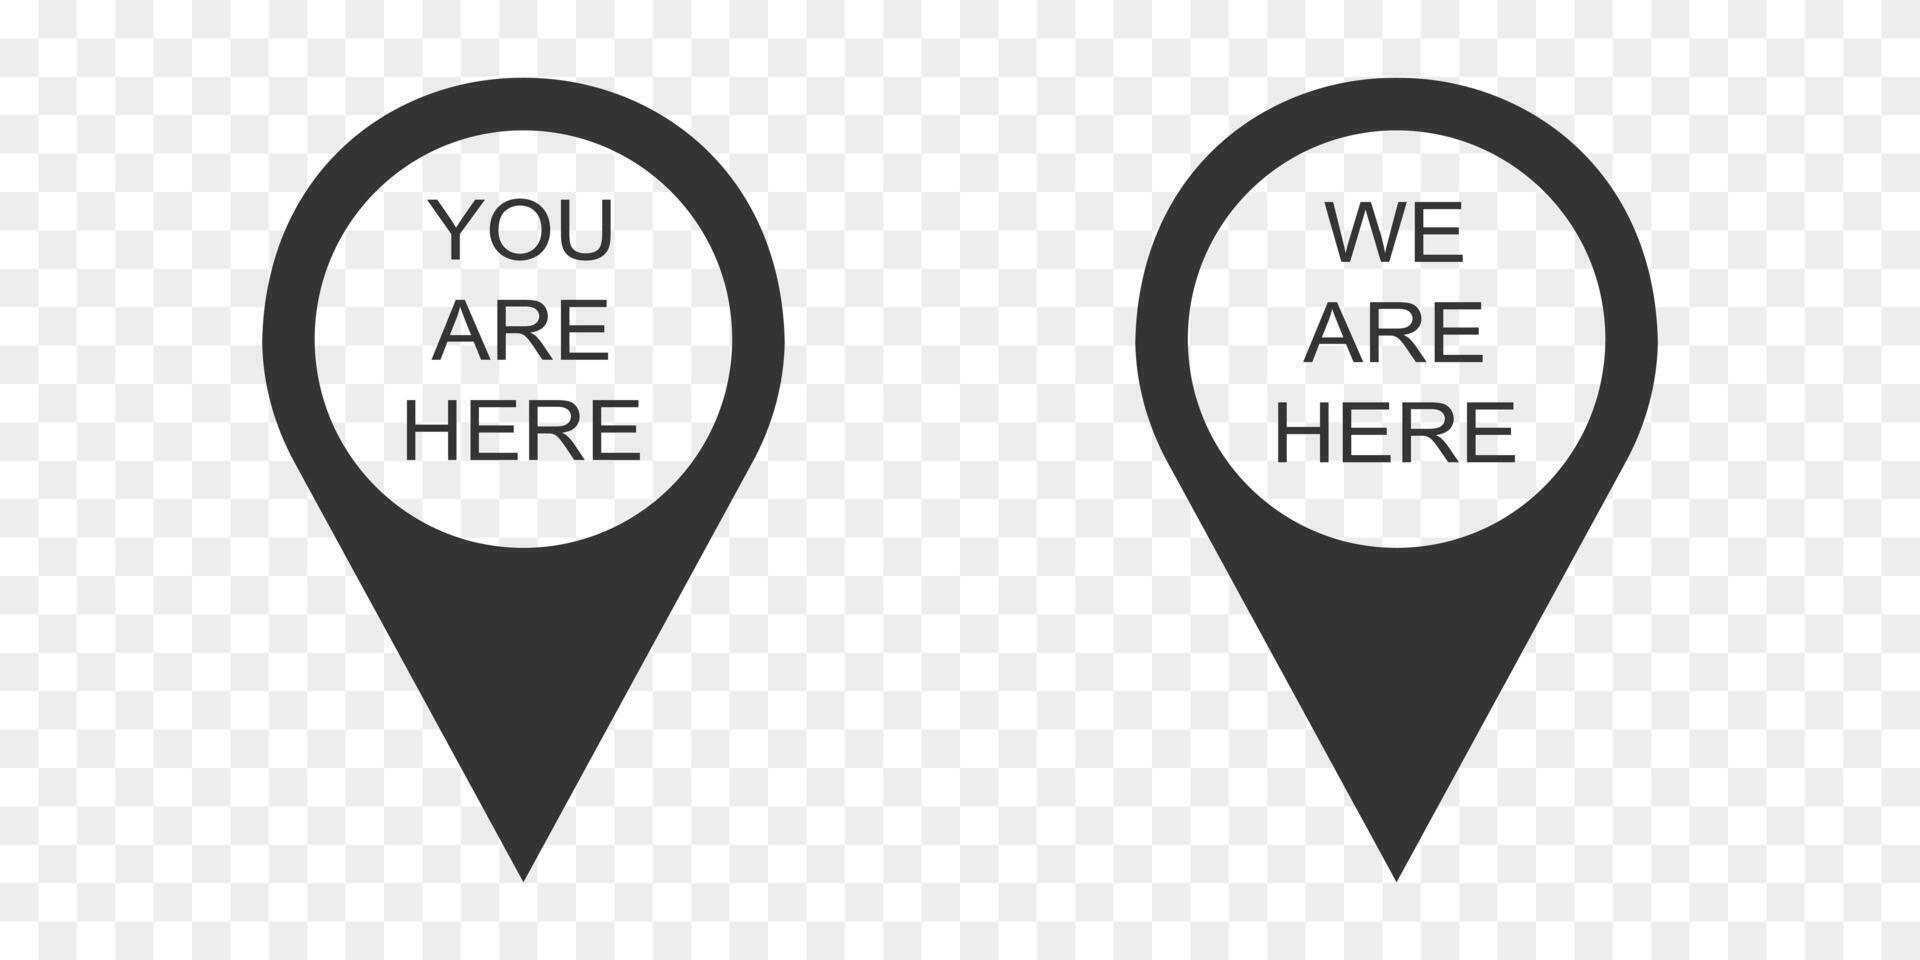 You and we are here map pin icons. GPS location data speech bubble sign. Destination mark vector